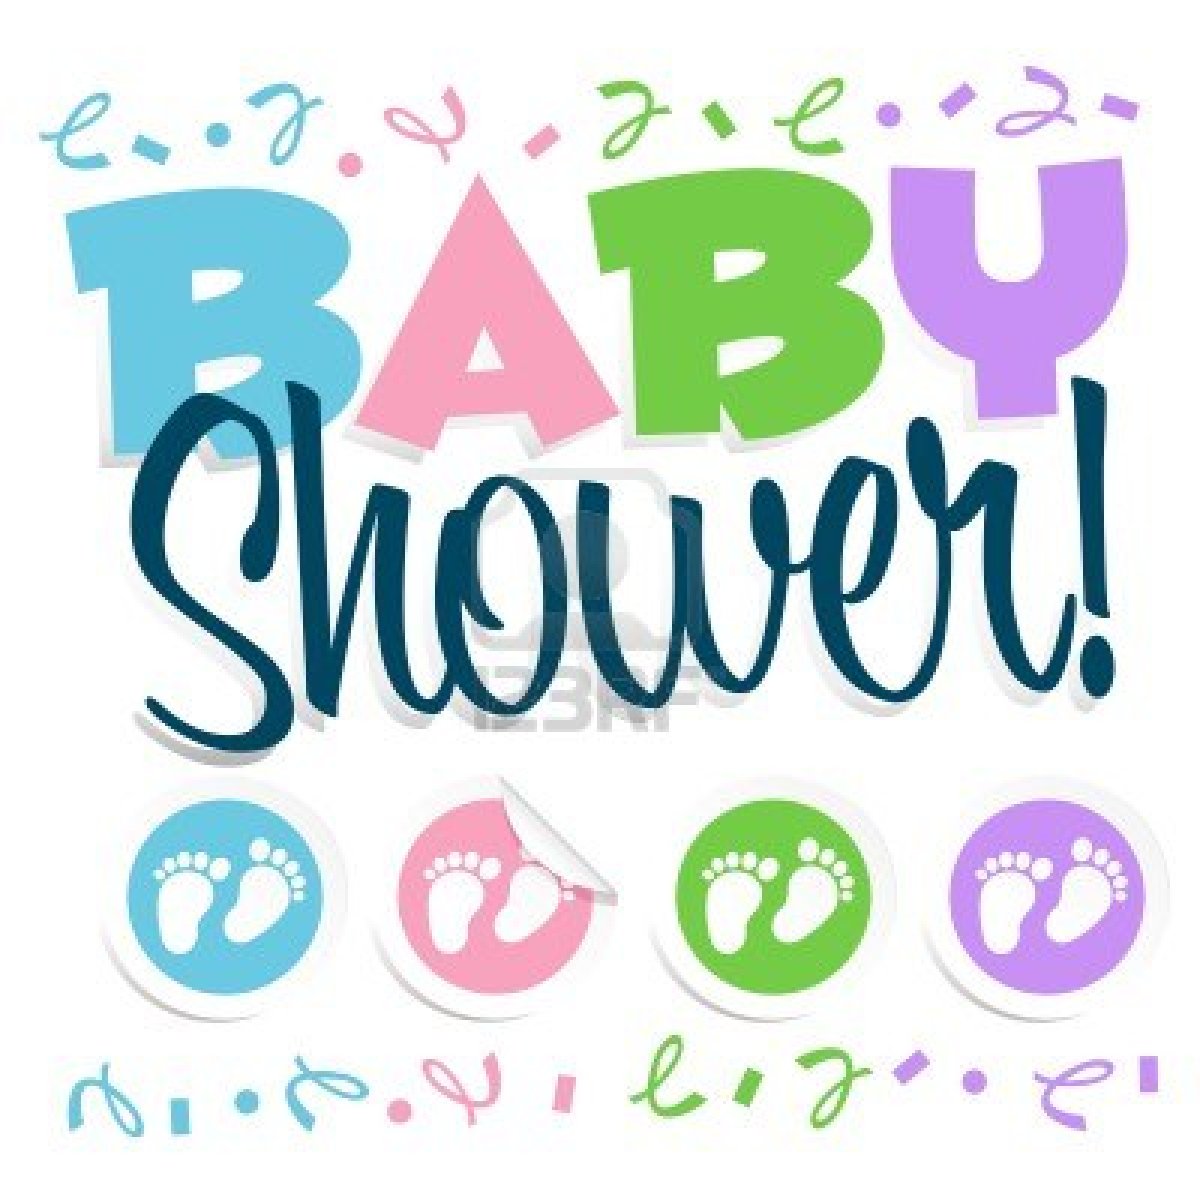 Baby Shower Free Clipart #1 .